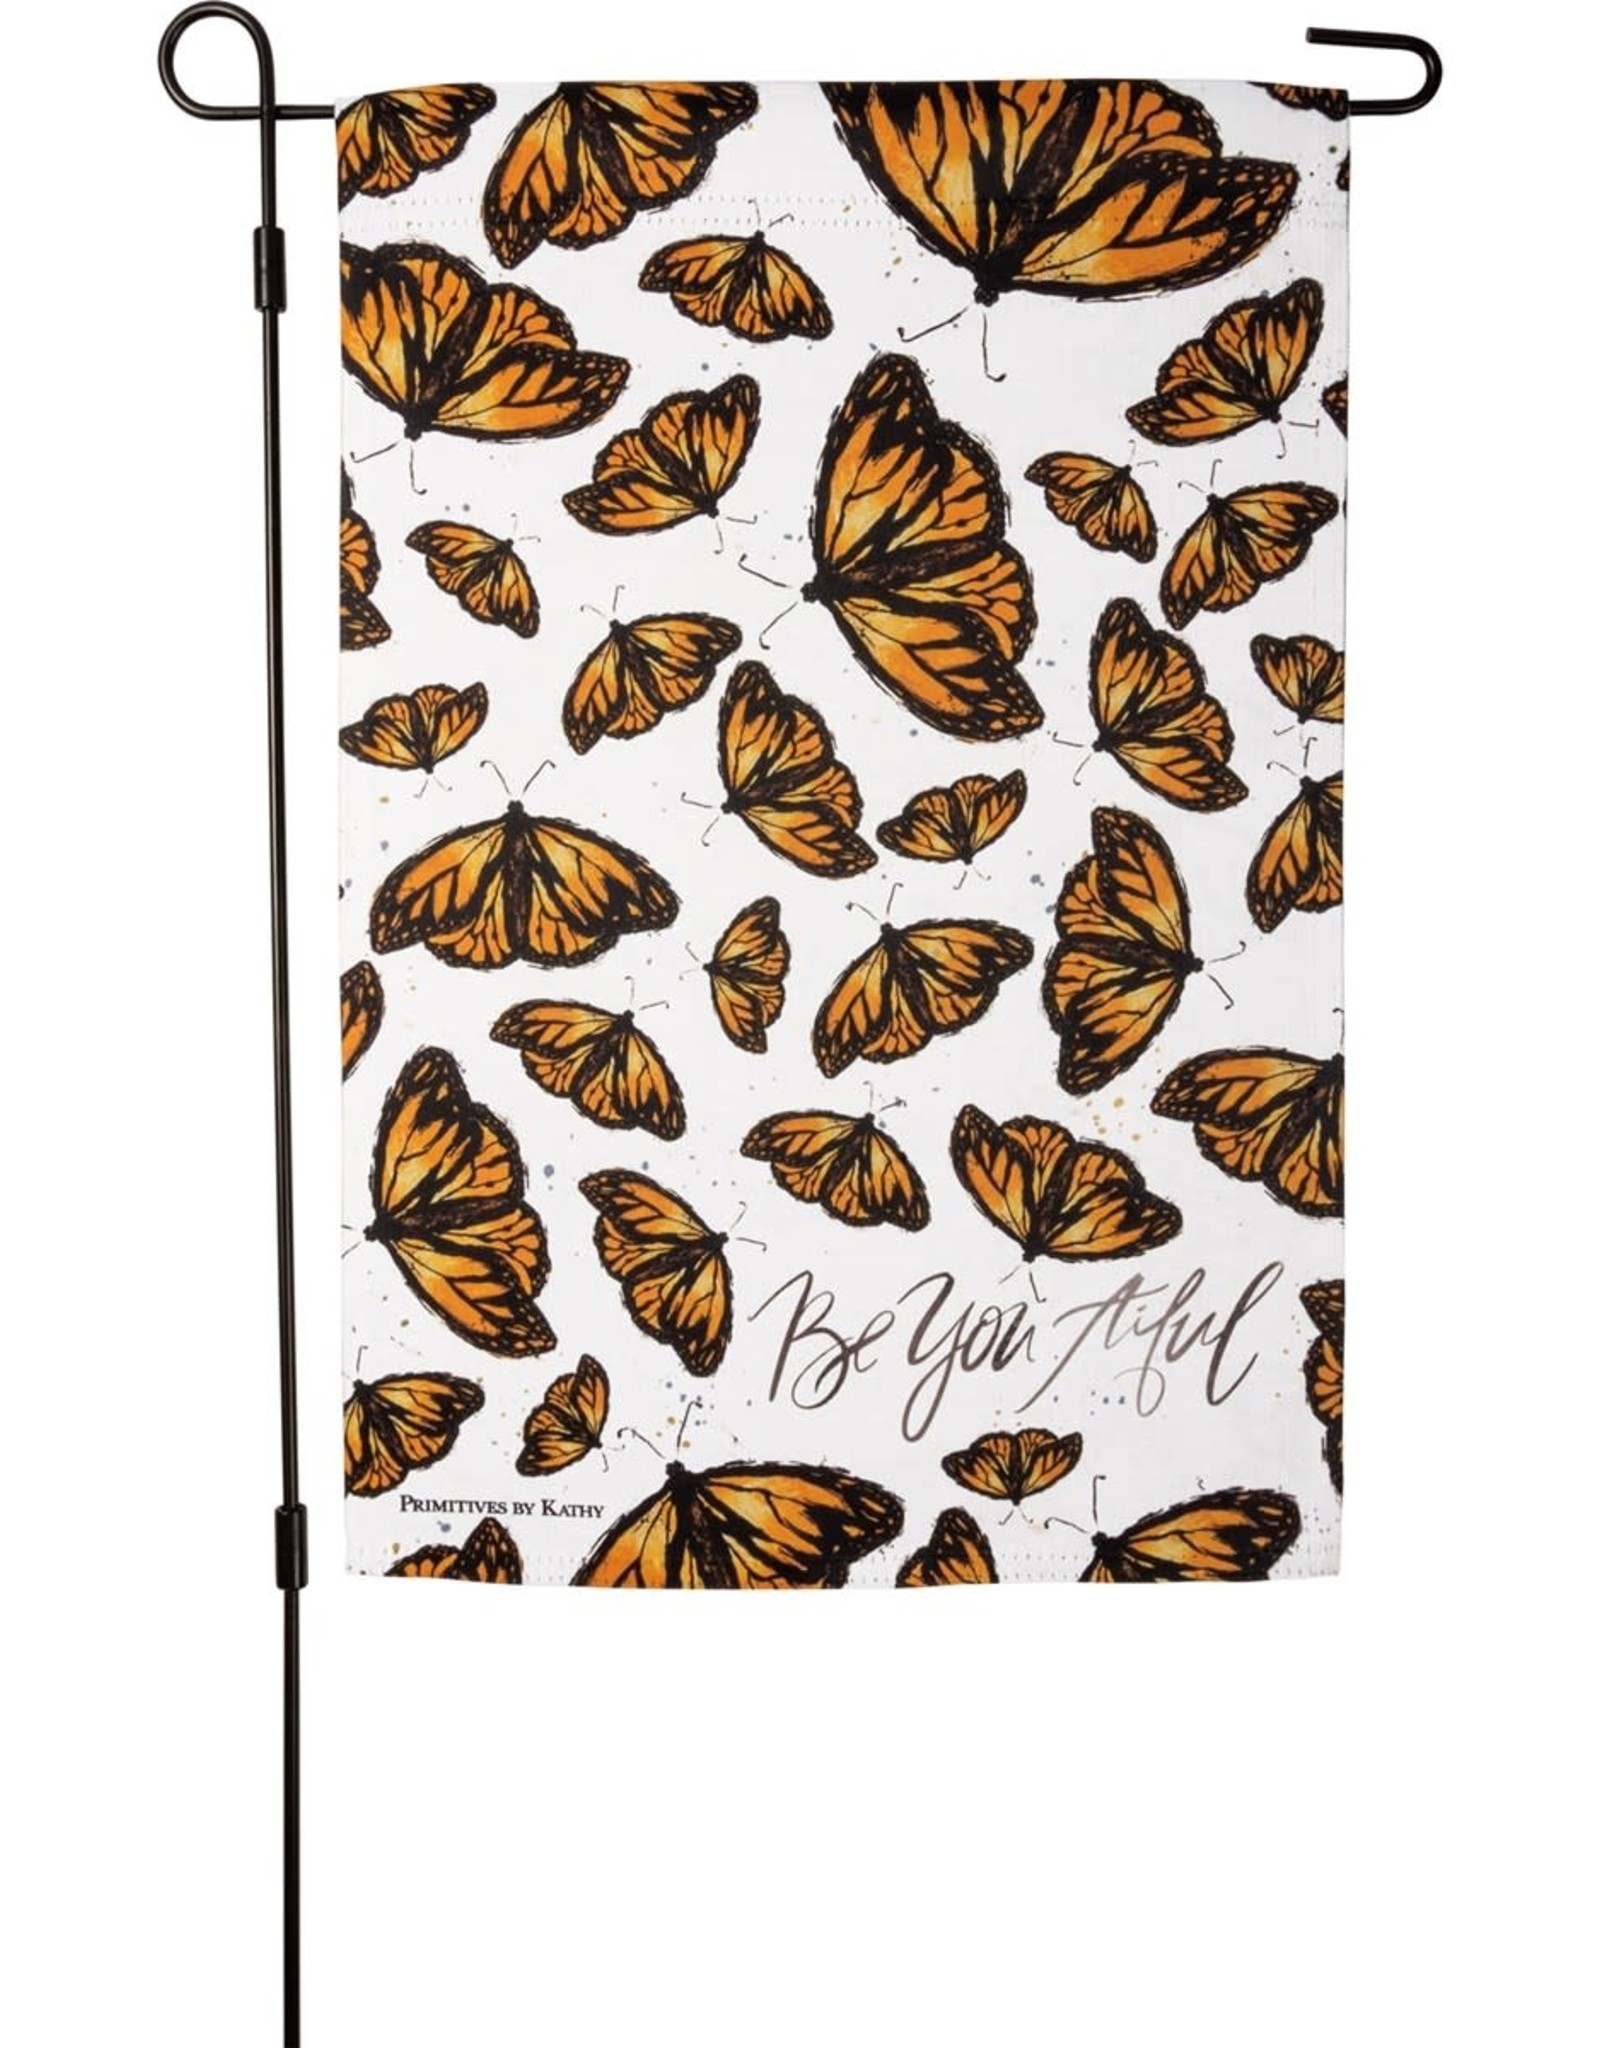 Primitives by Kathy Garden Flags - Be You tiful Butterflies